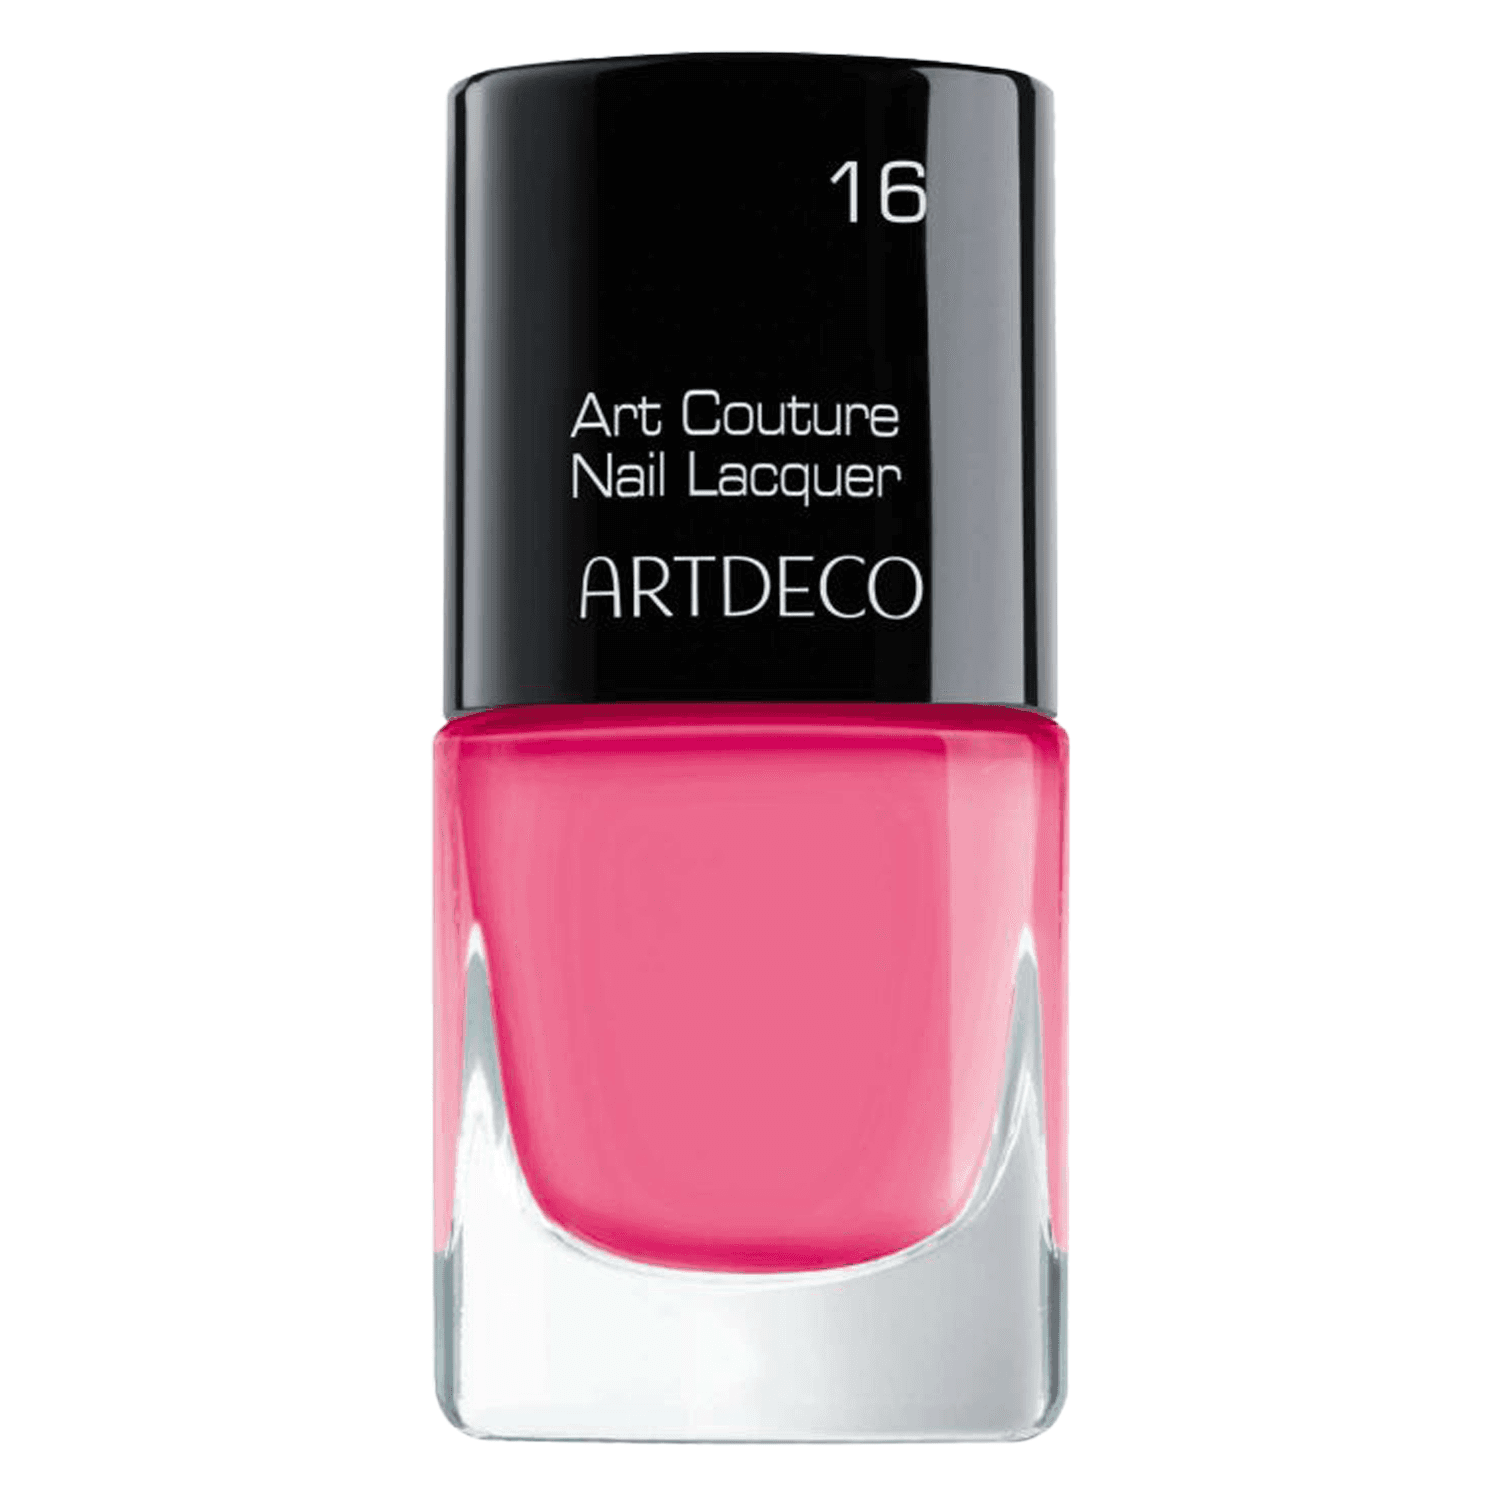 Art Couture - Nail Lacquer Lotus Flower 16